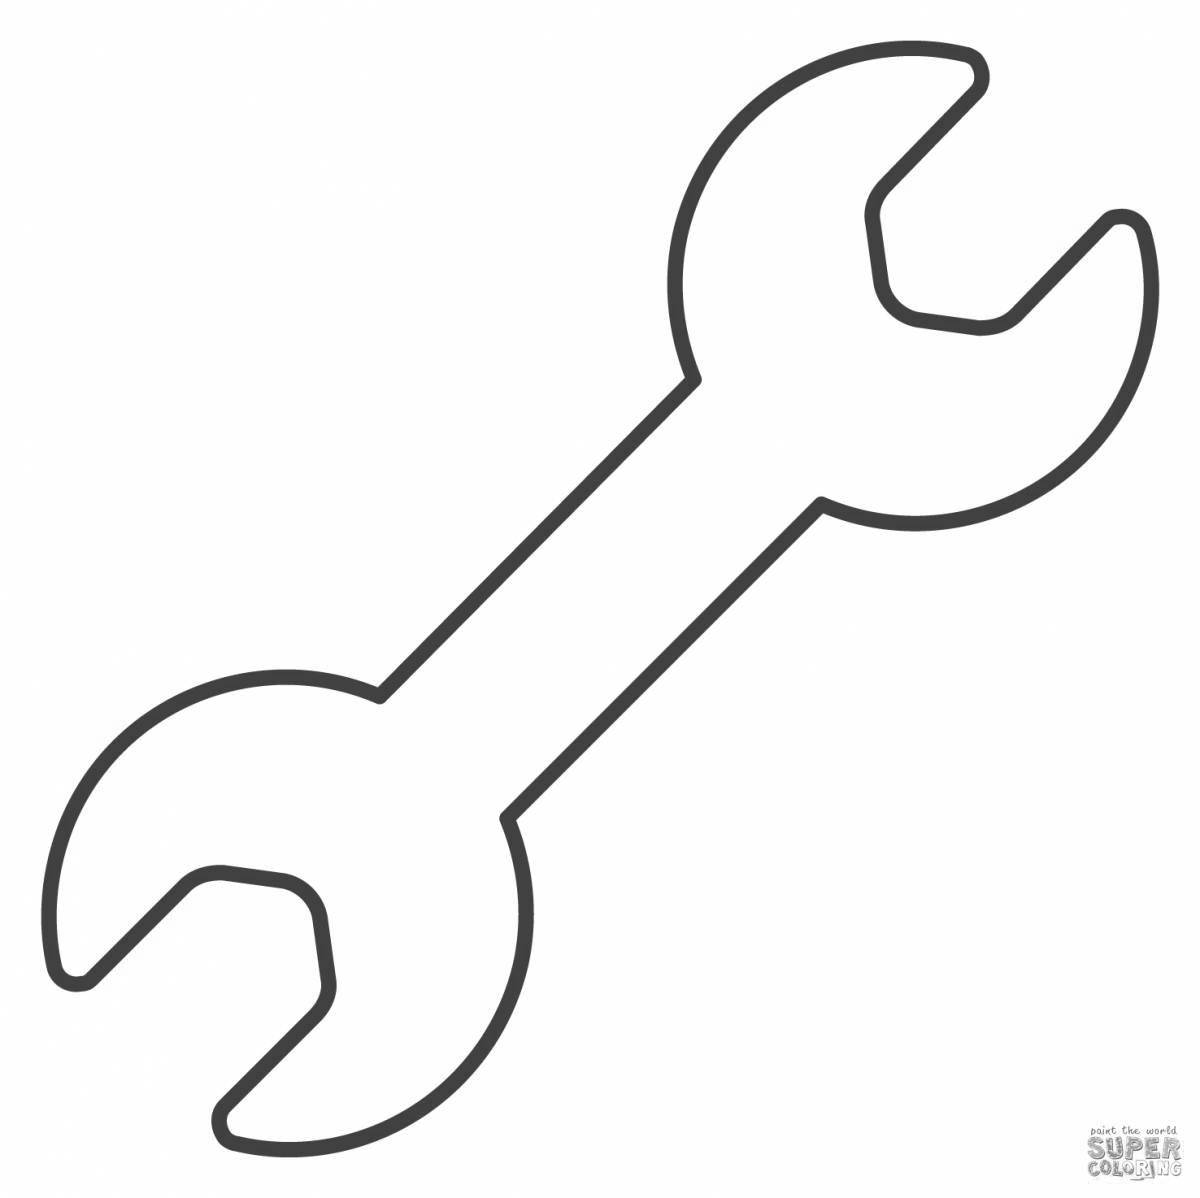 Exquisite wrench coloring page